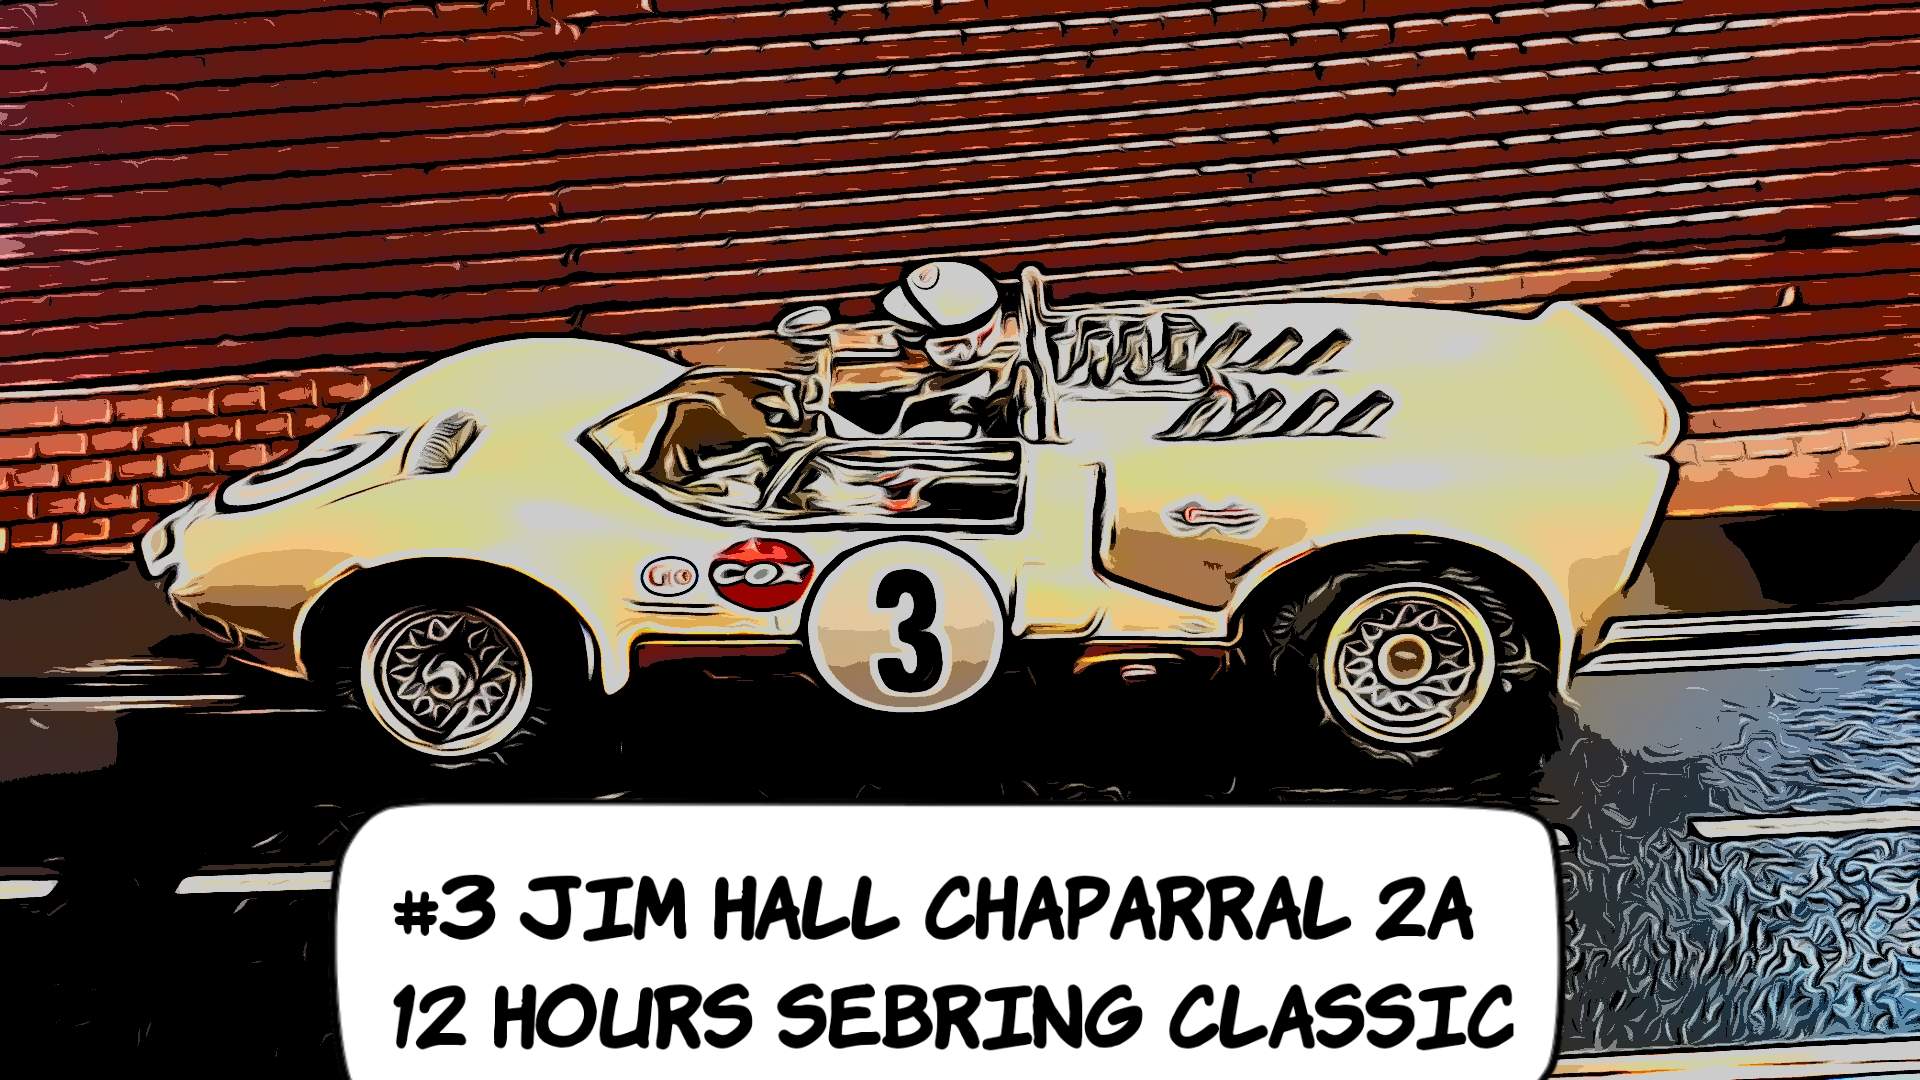 * SALE, Save $50 off vs our $279.99 Ebay Store * COX Chaparral 2A Jim Hall Sebring 12 Hours Racer 1/24 Scale Slot Car 3 (Traditional Jim Hall 12 Hours of Sebring Livery)